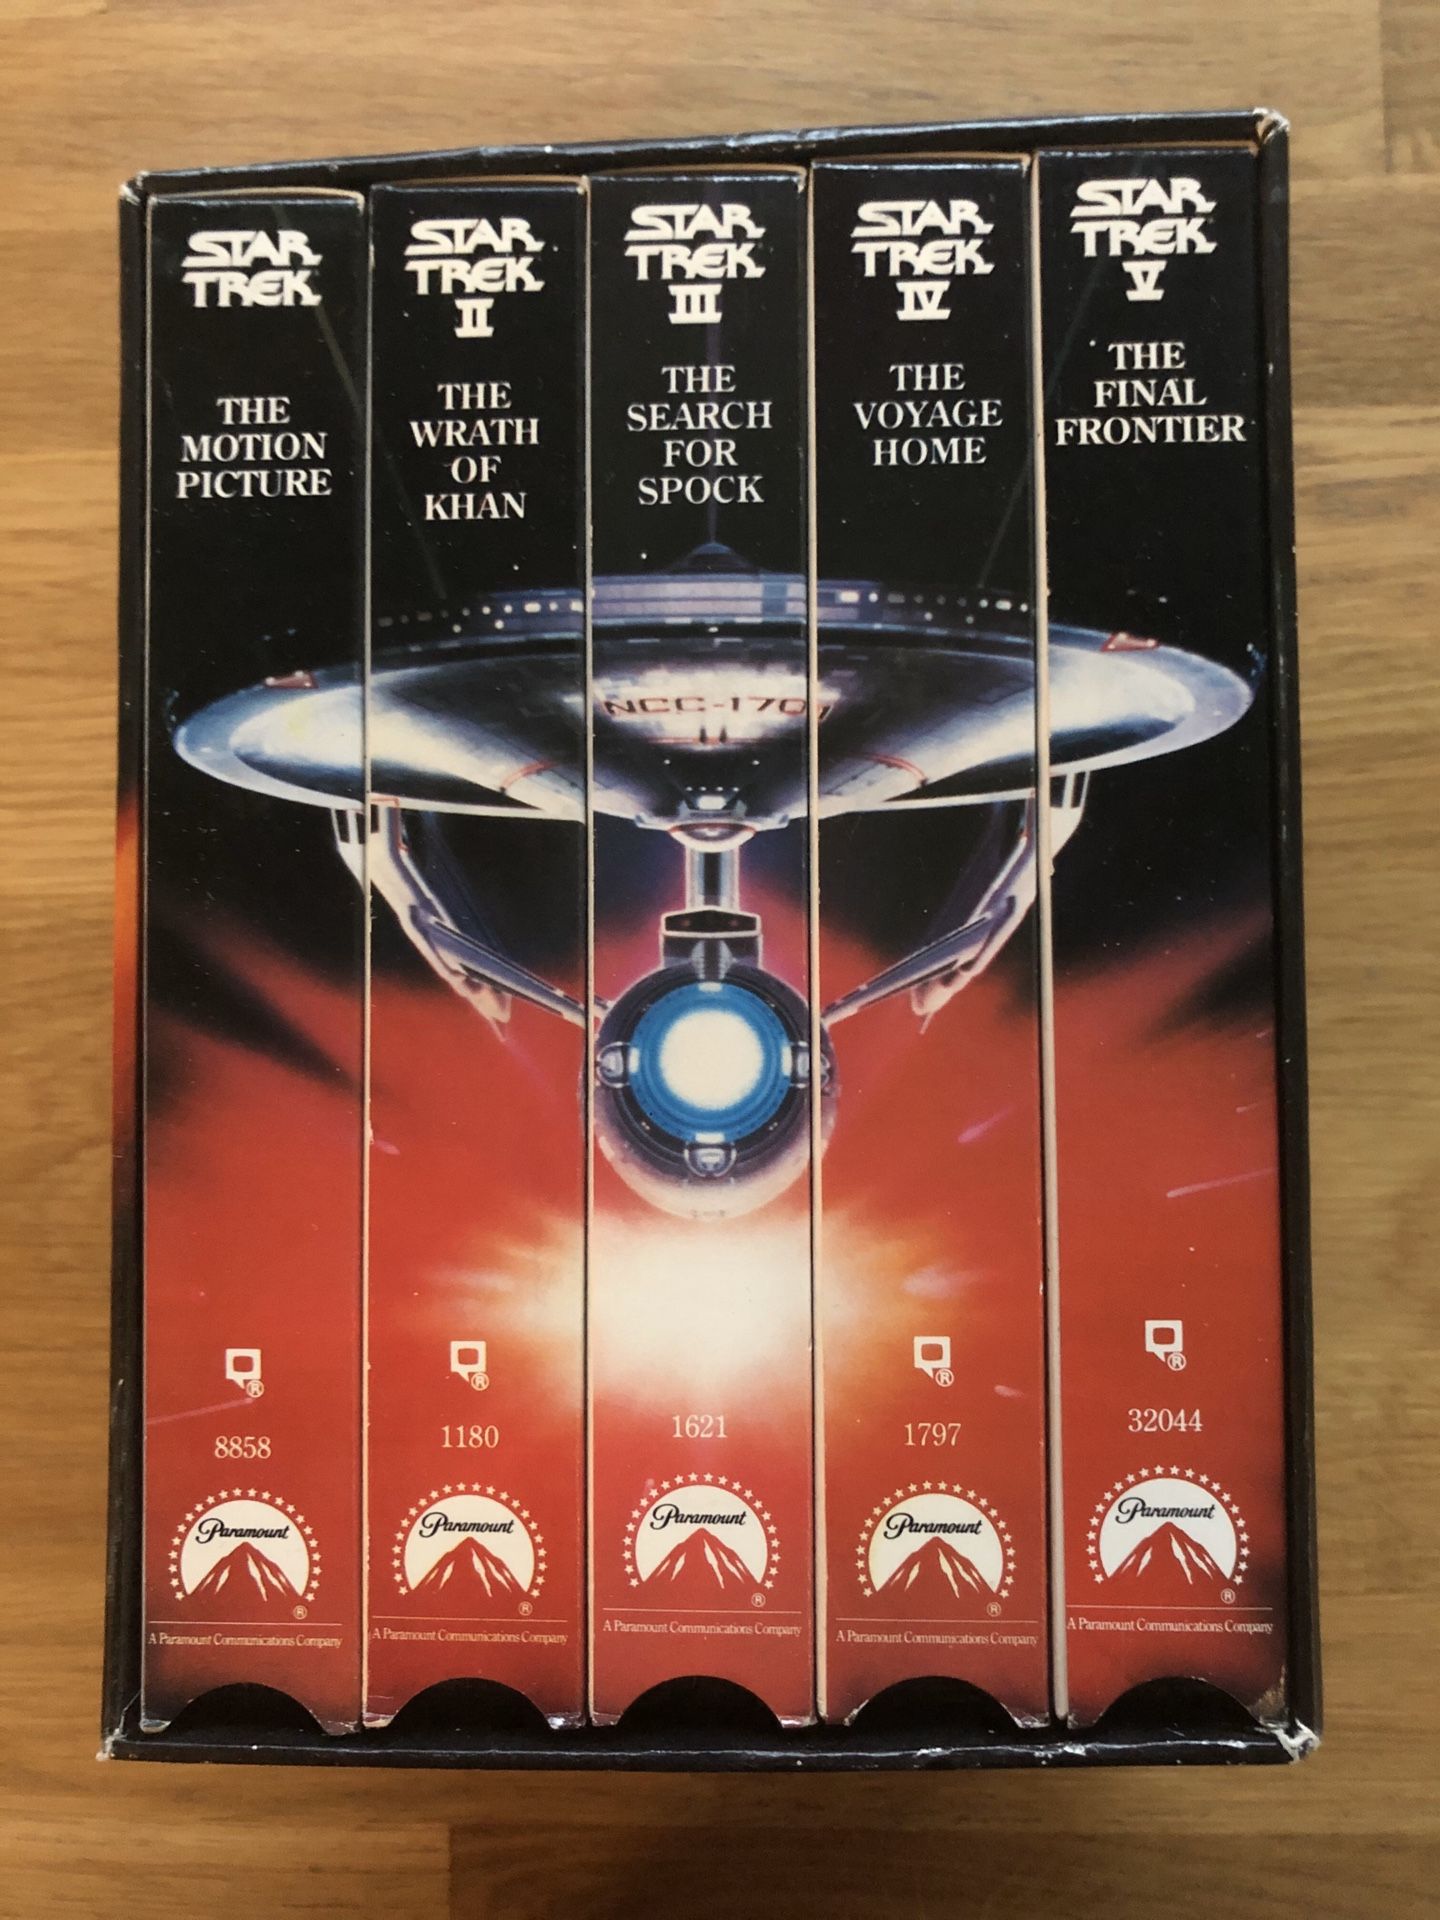 Star Trek - The Movies: 25th Anniversary Collector's Set